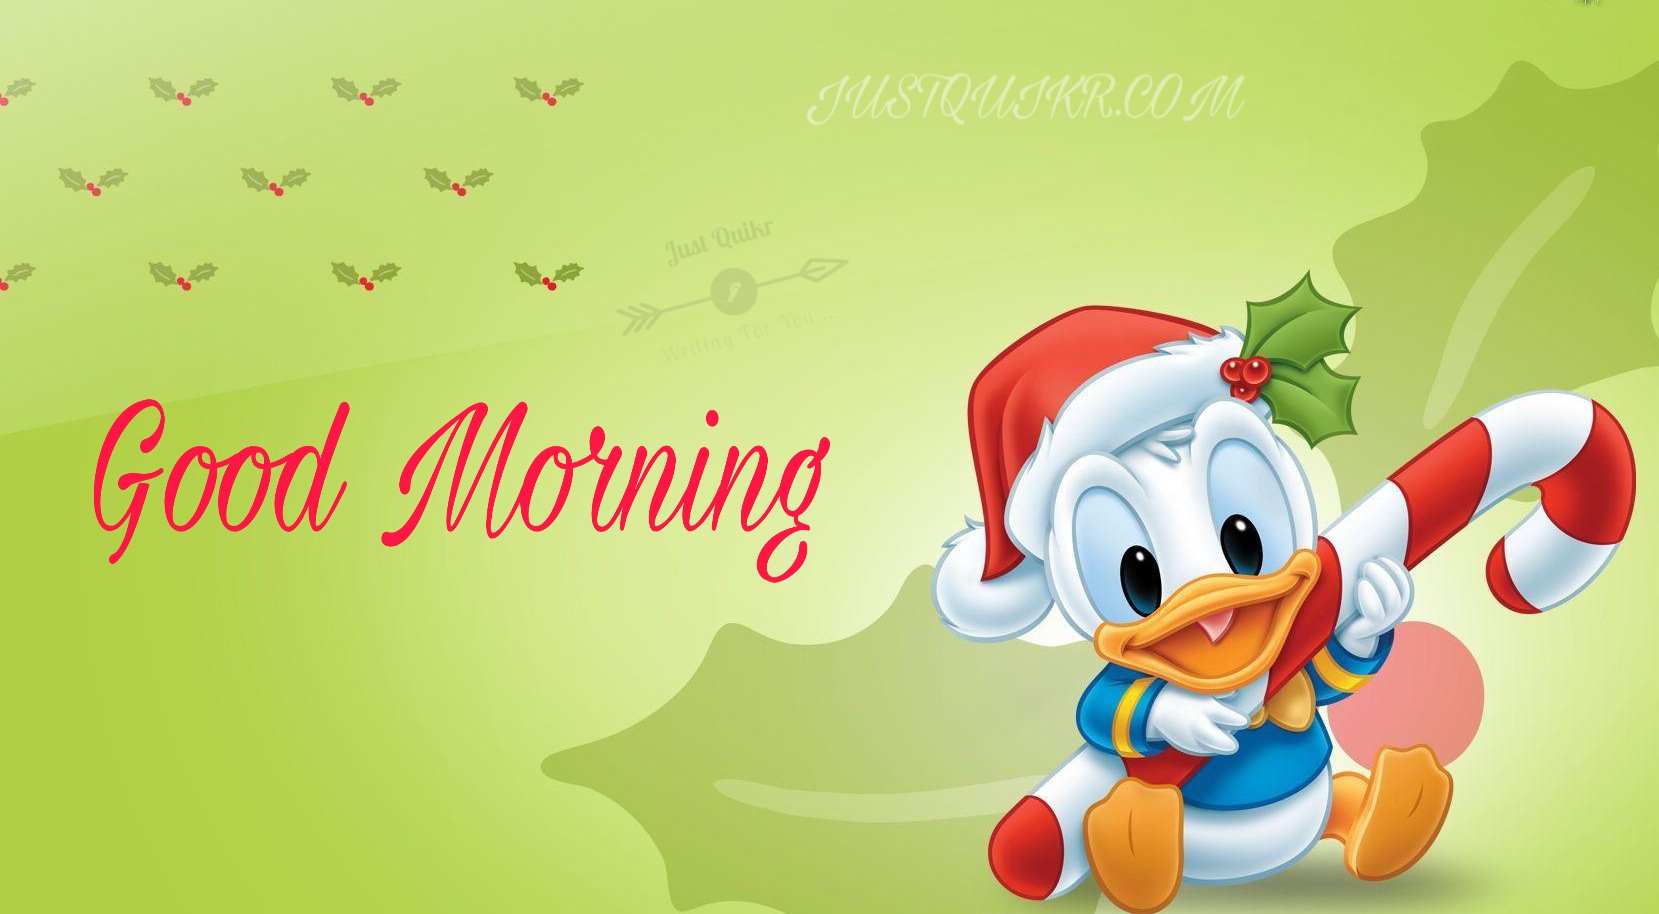 Good Morning Cartoon Quotes Messages Wishes Shayari SMS HD Pics Images